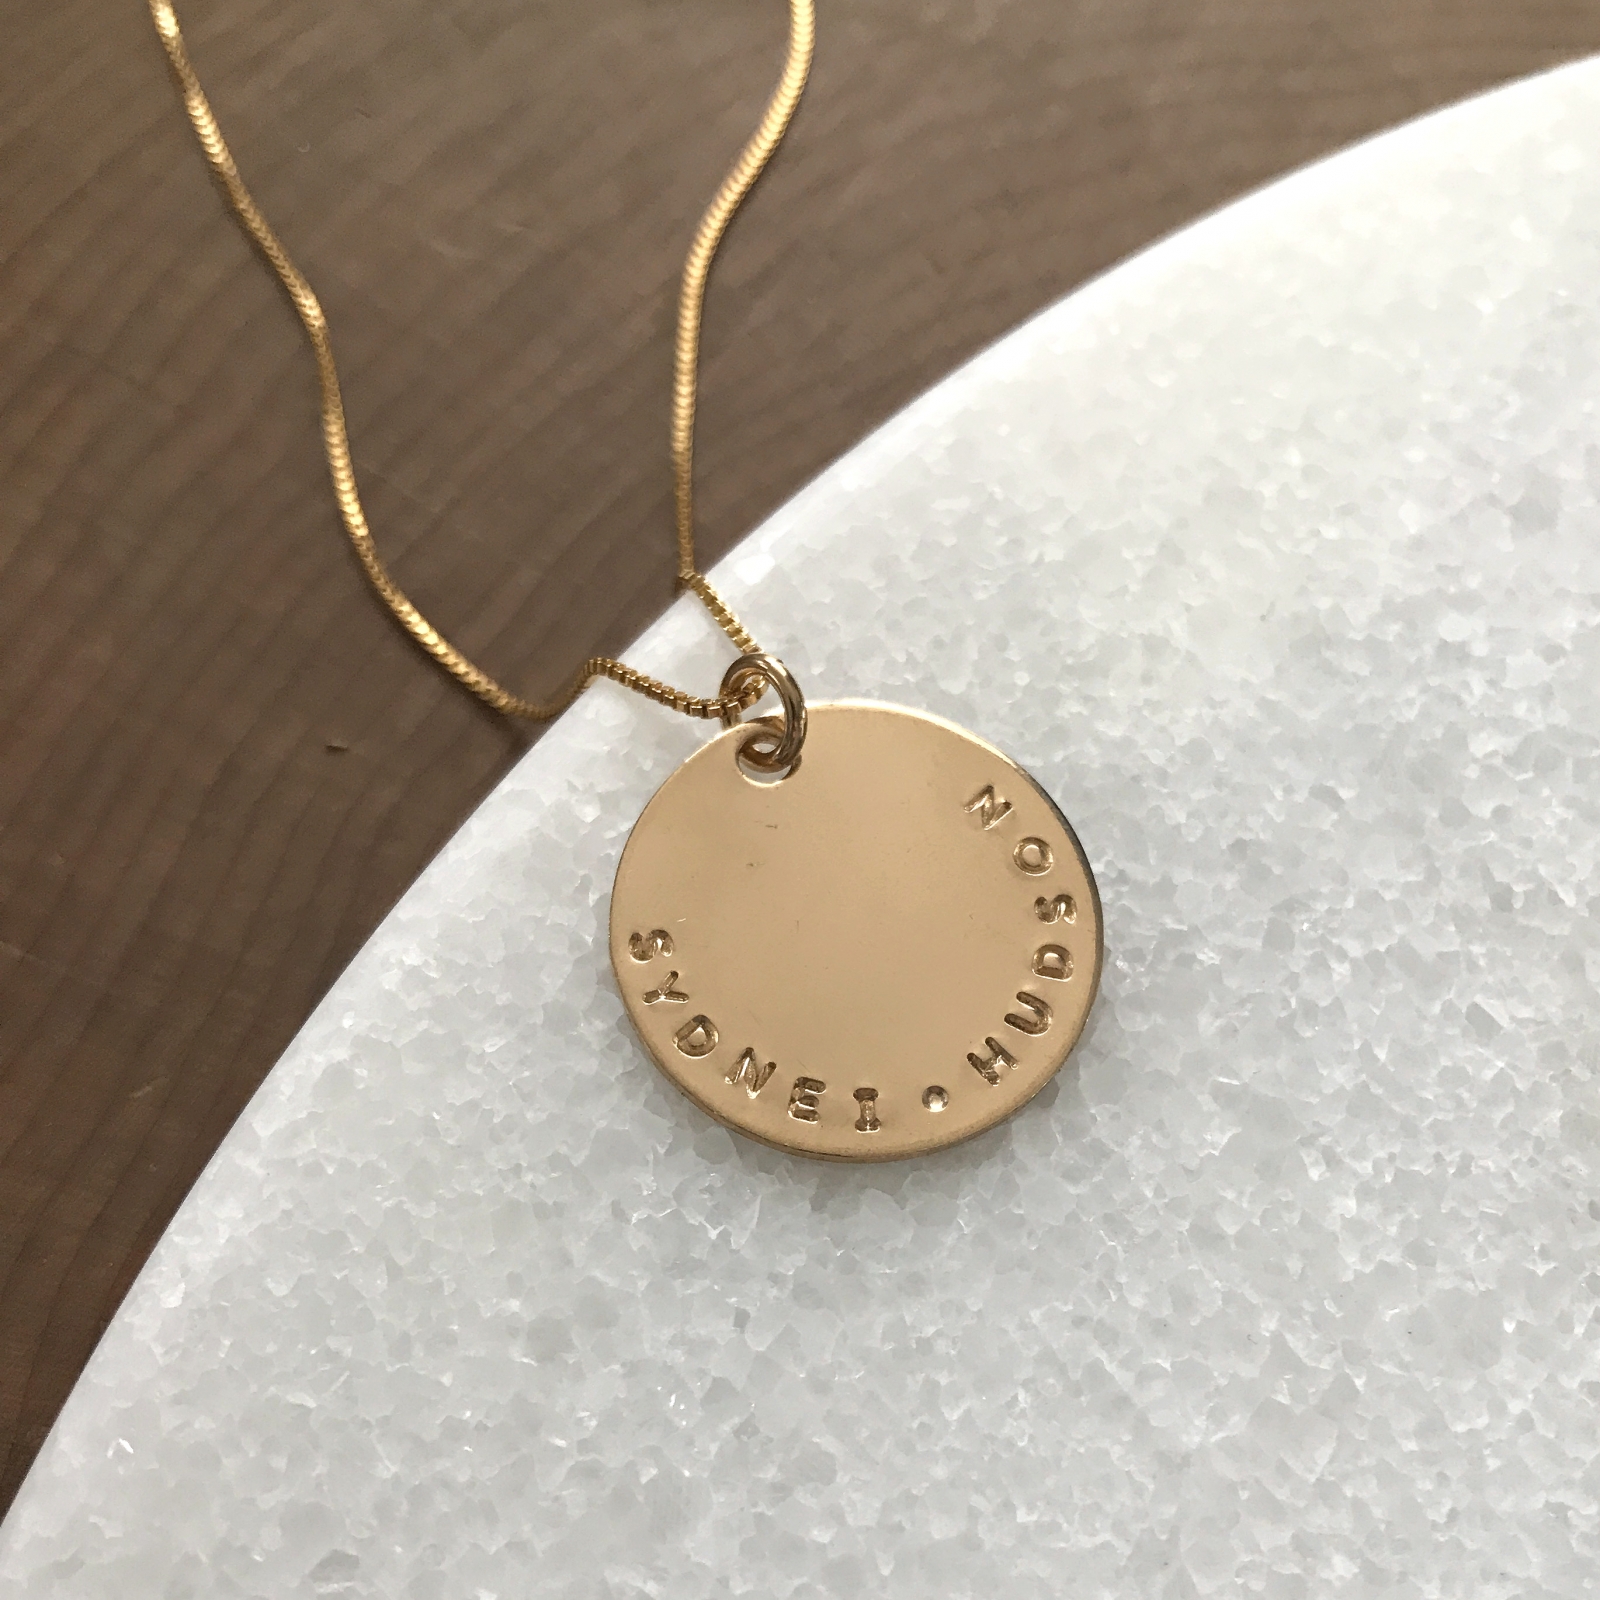 Shield Necklace / 14k Yellow Gold Filled / Large Convex Domed Disk / Rustic  Hammered Texture / Touchstone Necklace